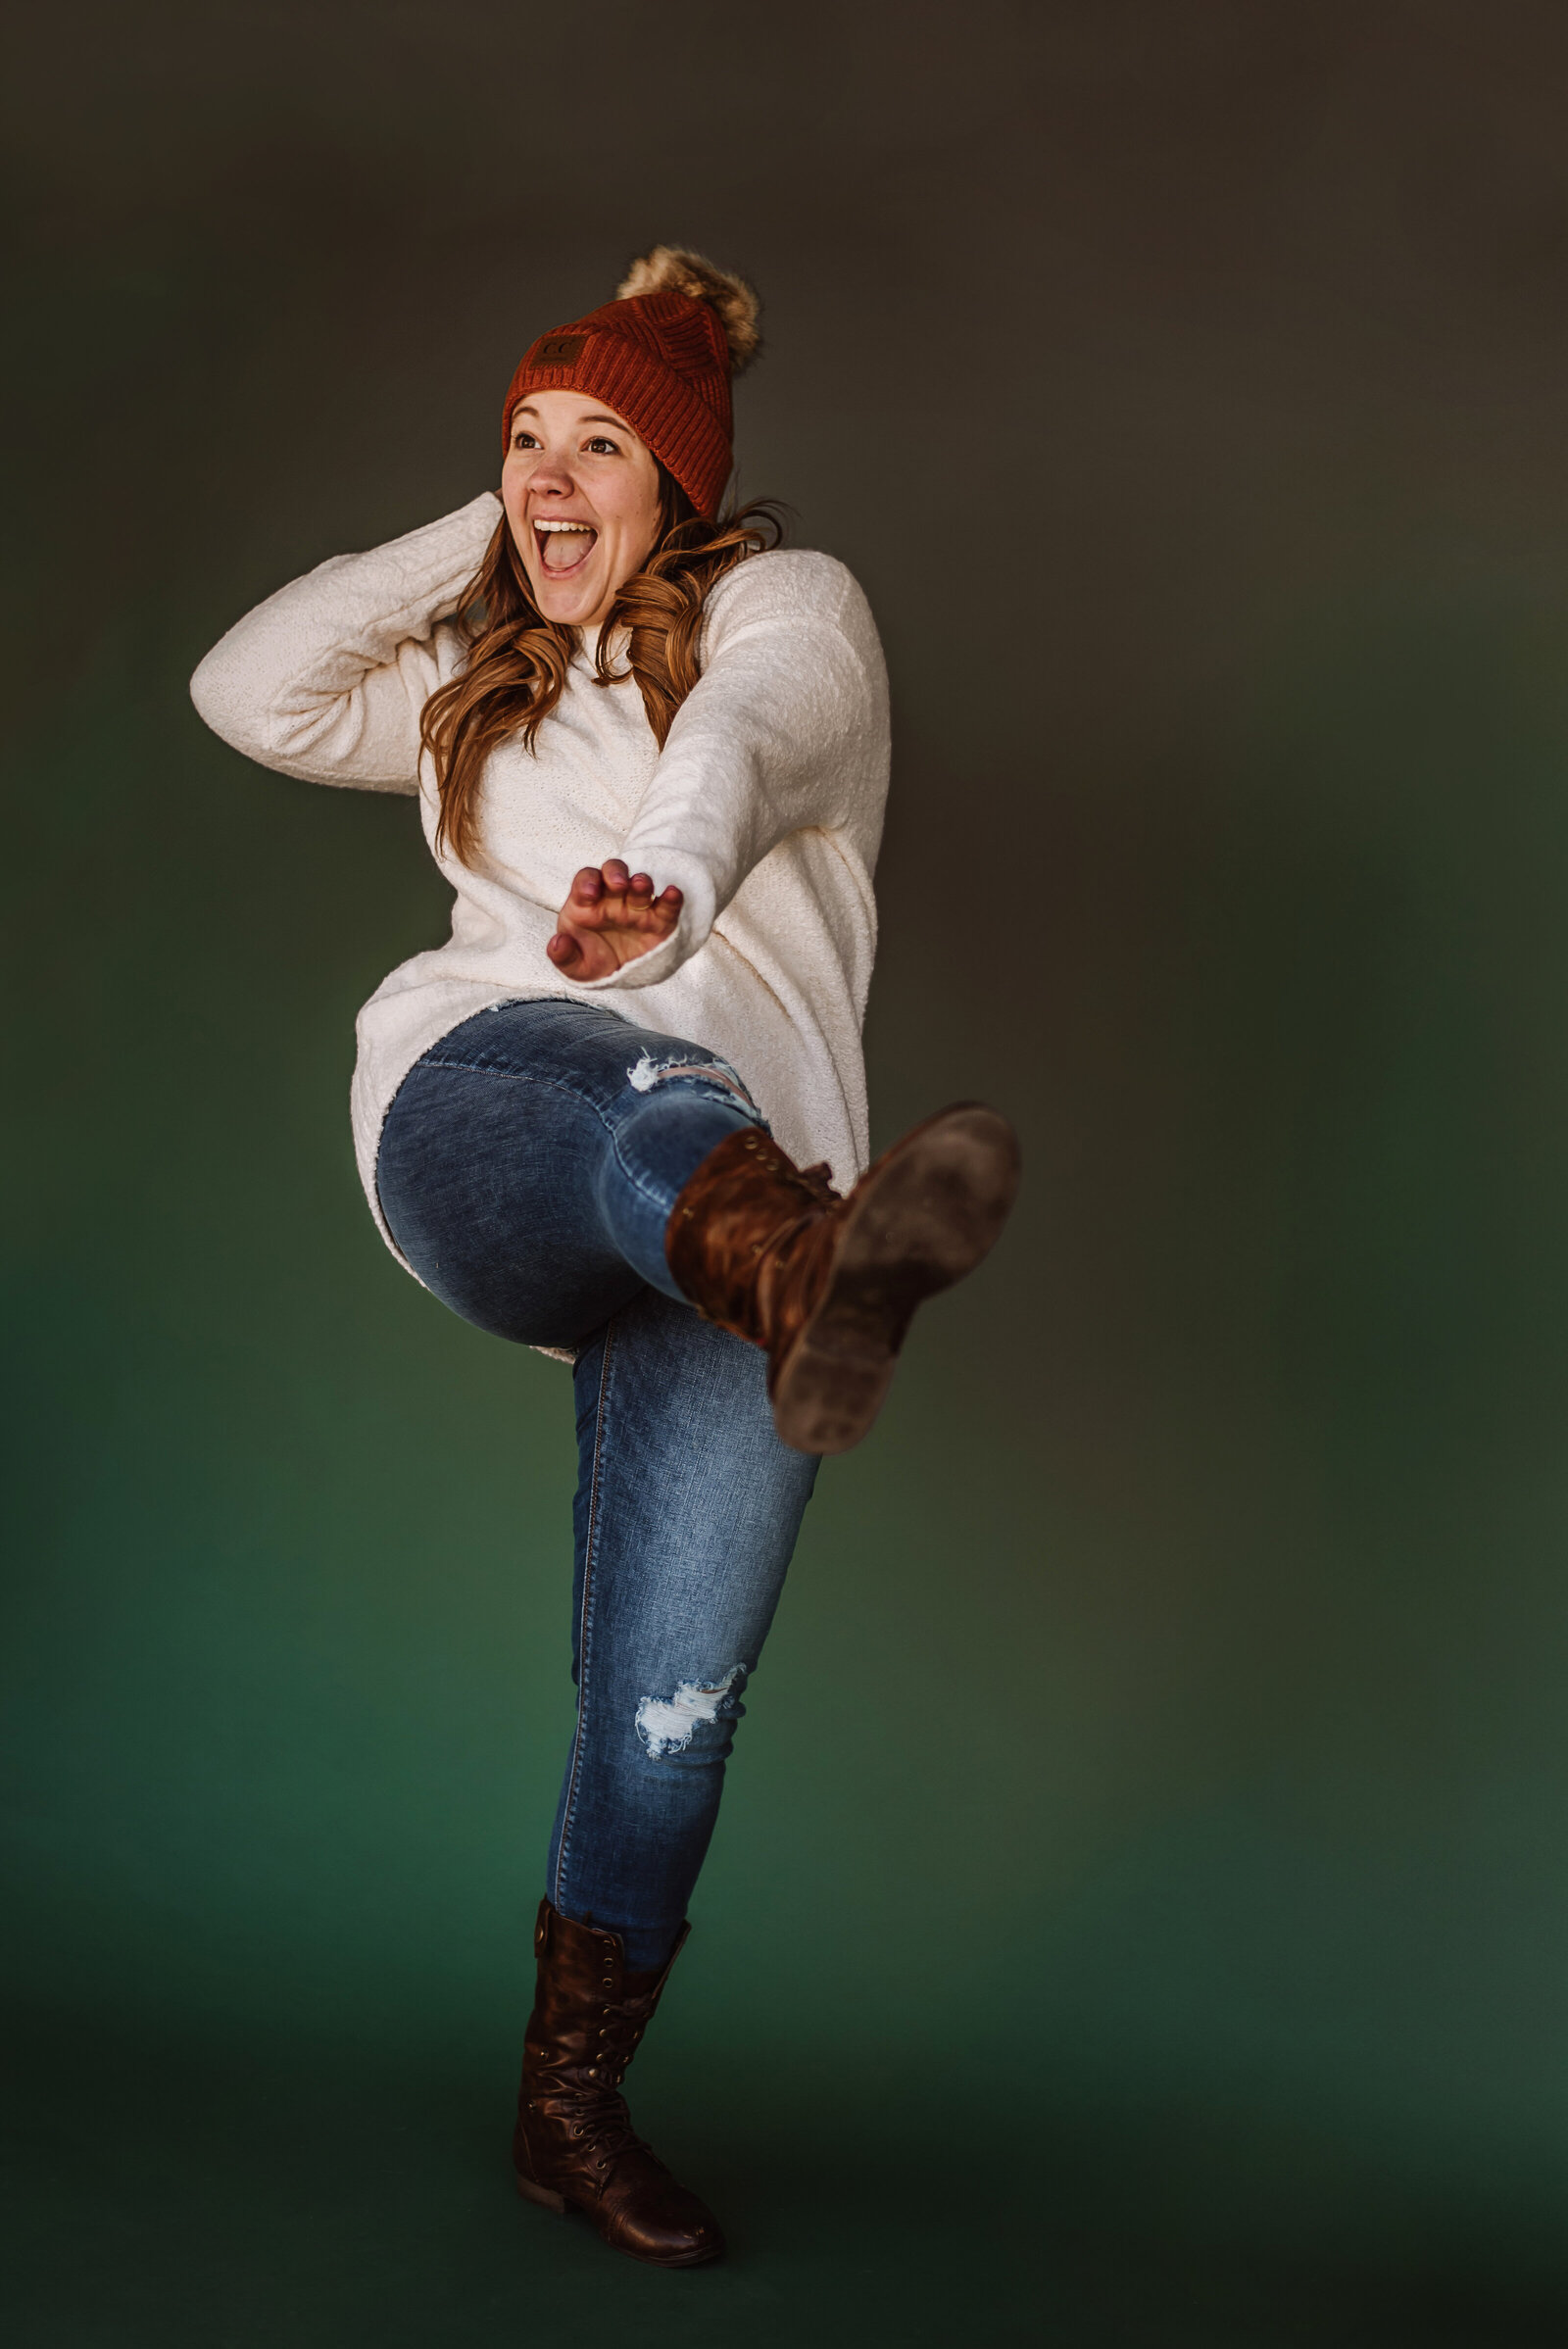 Knoxville photographer jumping in lifestyle headshot